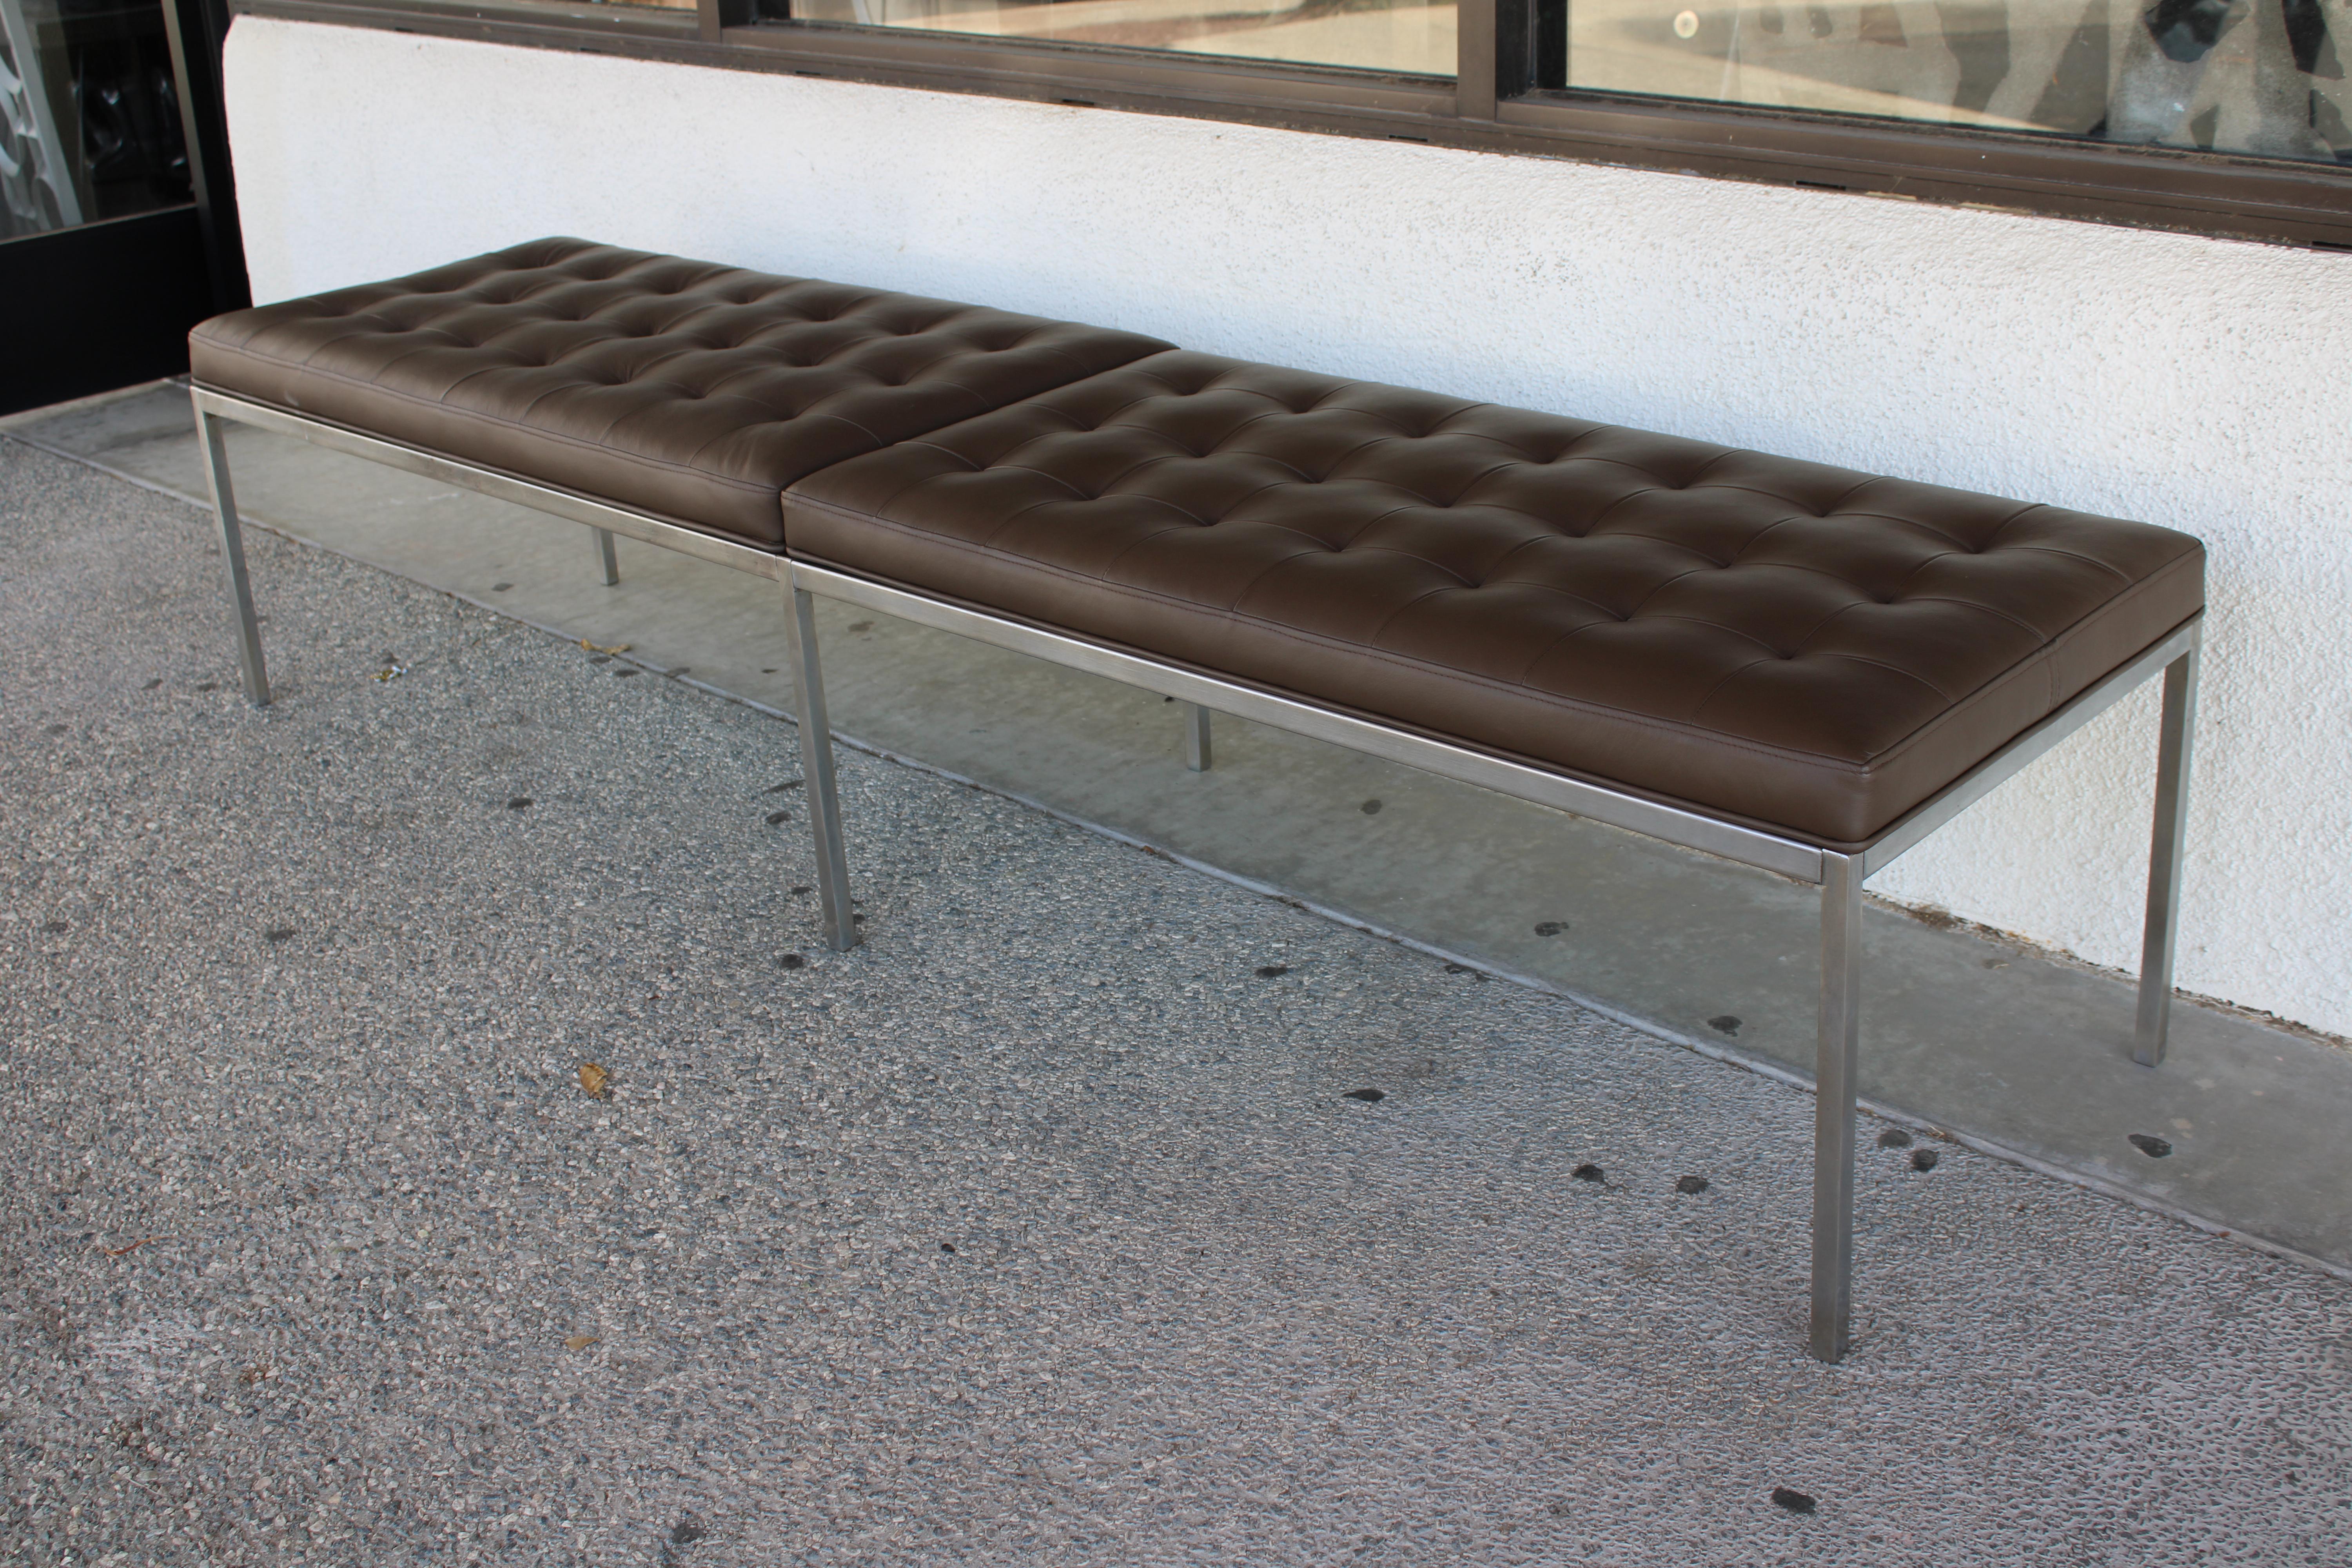 Florence Knoll bench with early label Knoll Associates, Inc.  Madison Ave, NY.  We had the bench redone in brown leather.  Bench measures 80